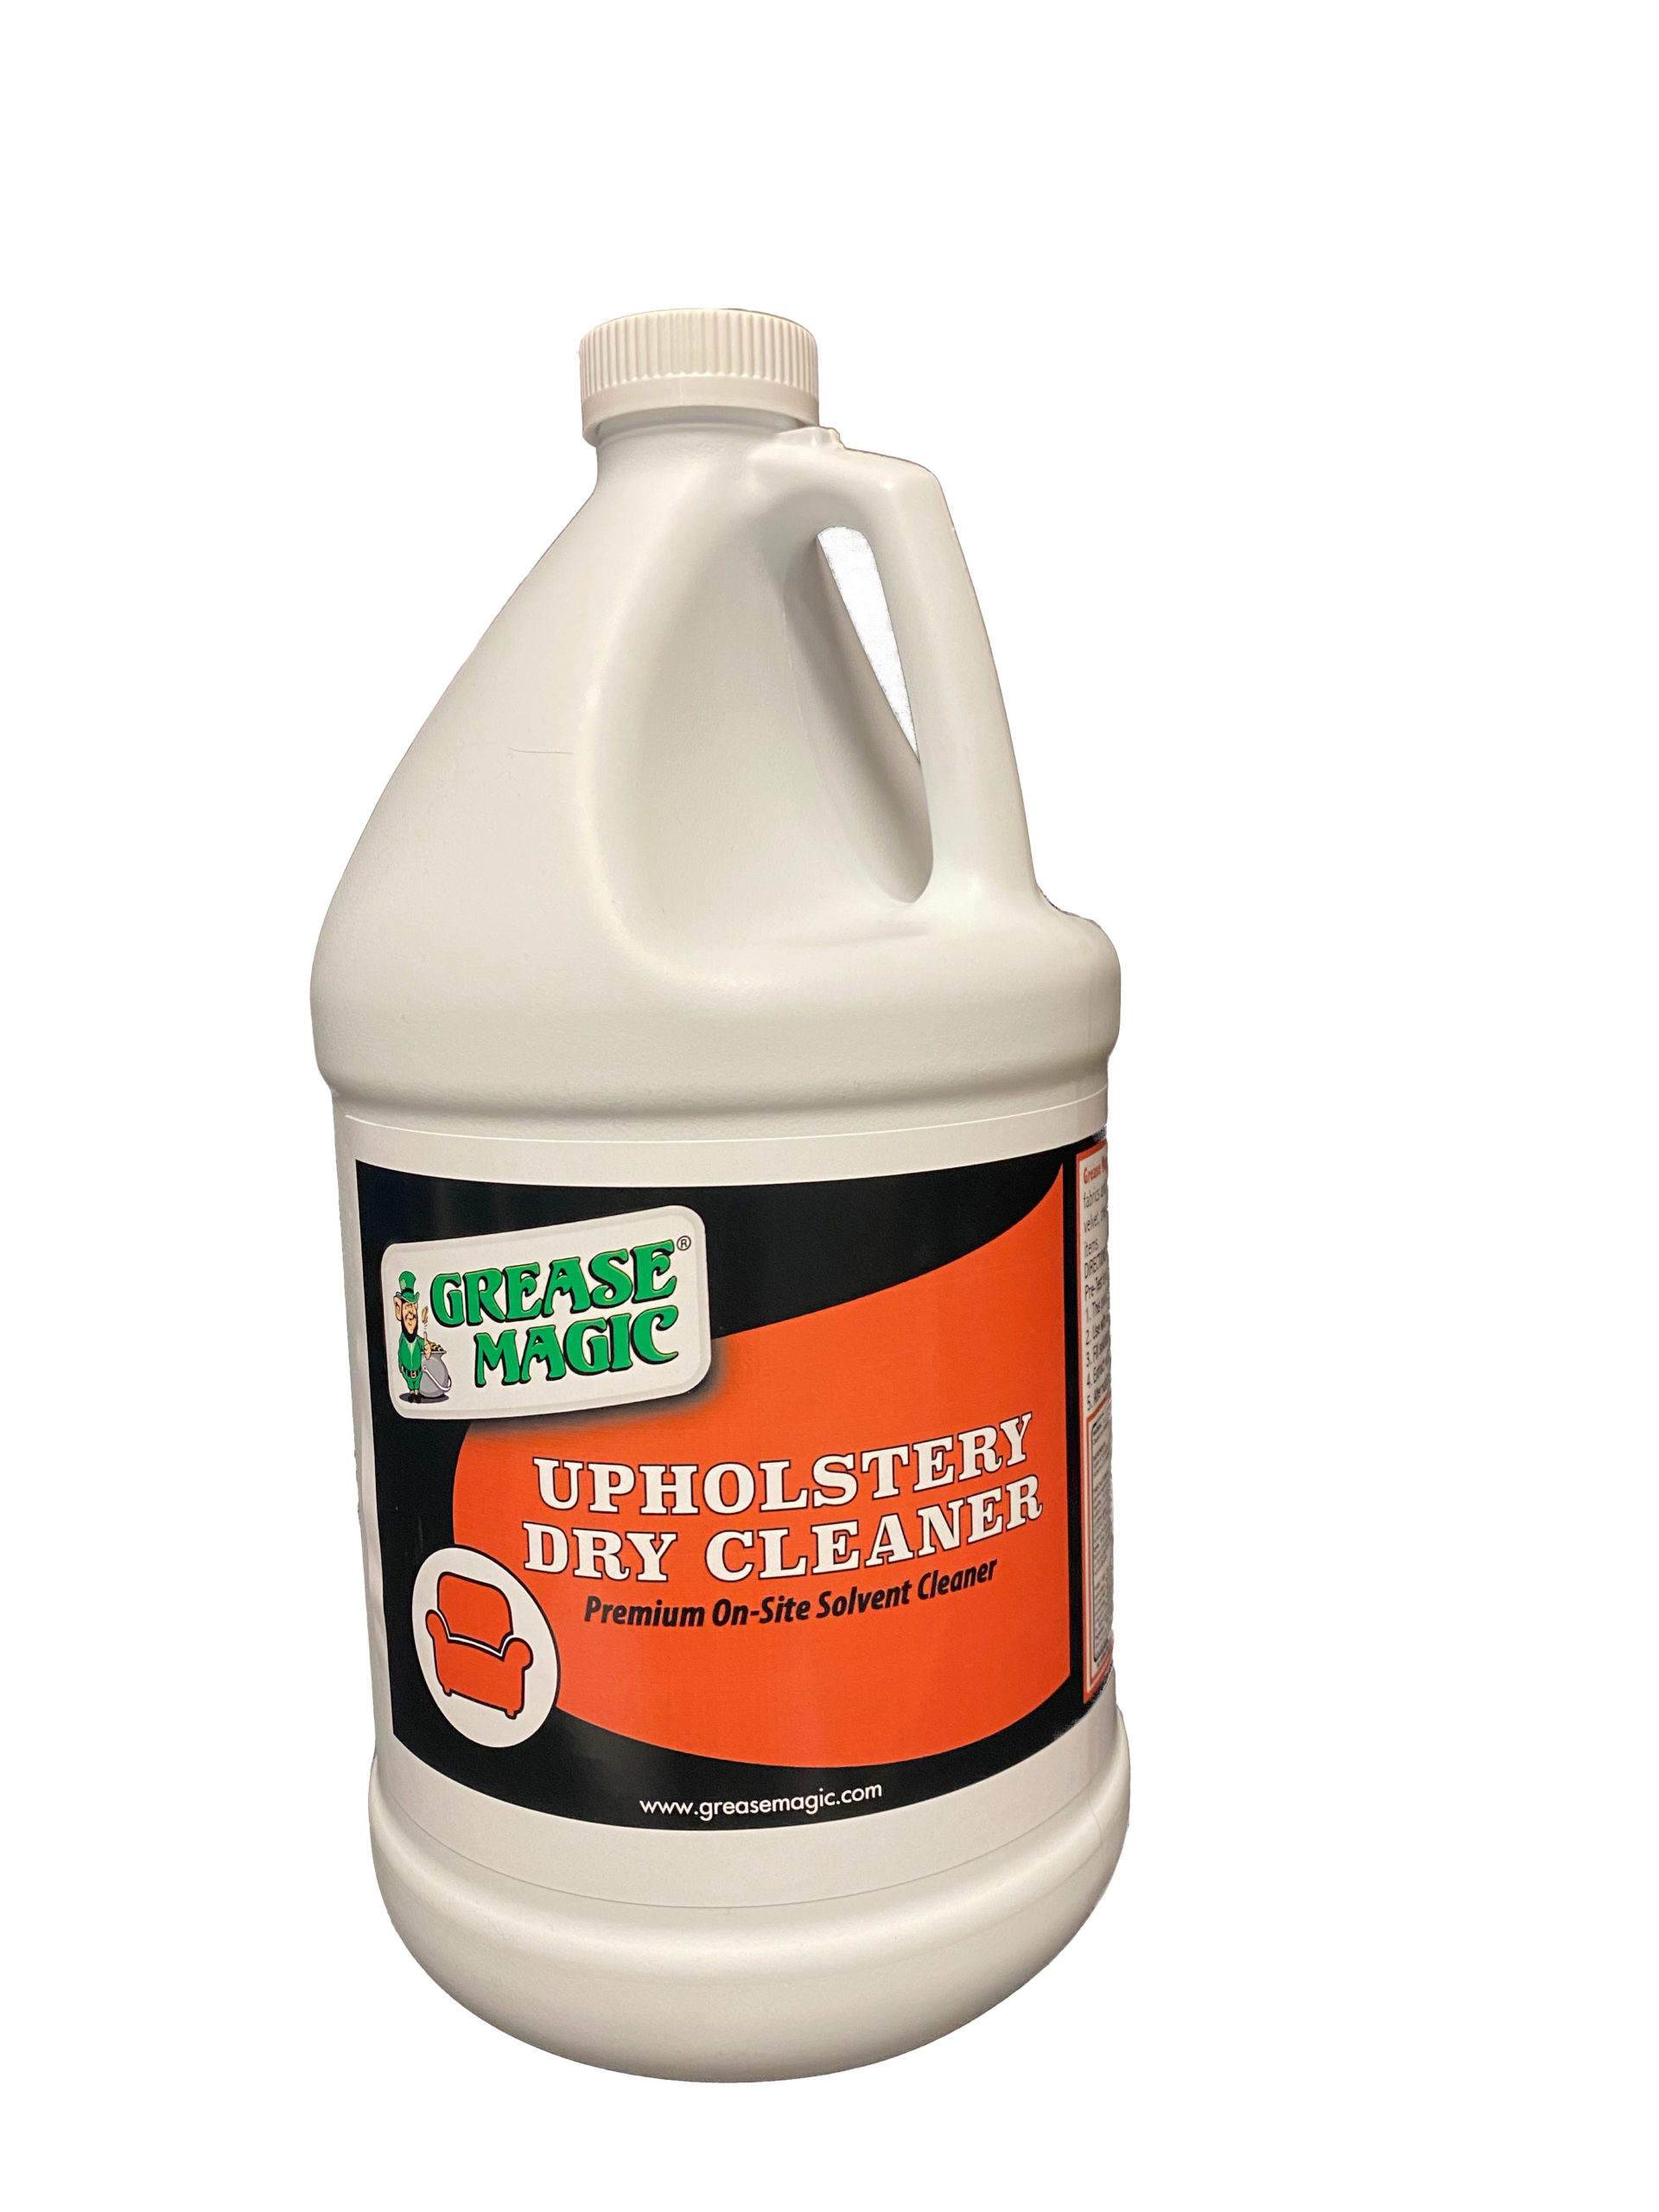 Grease Magic Upholstery Dry Cleaner